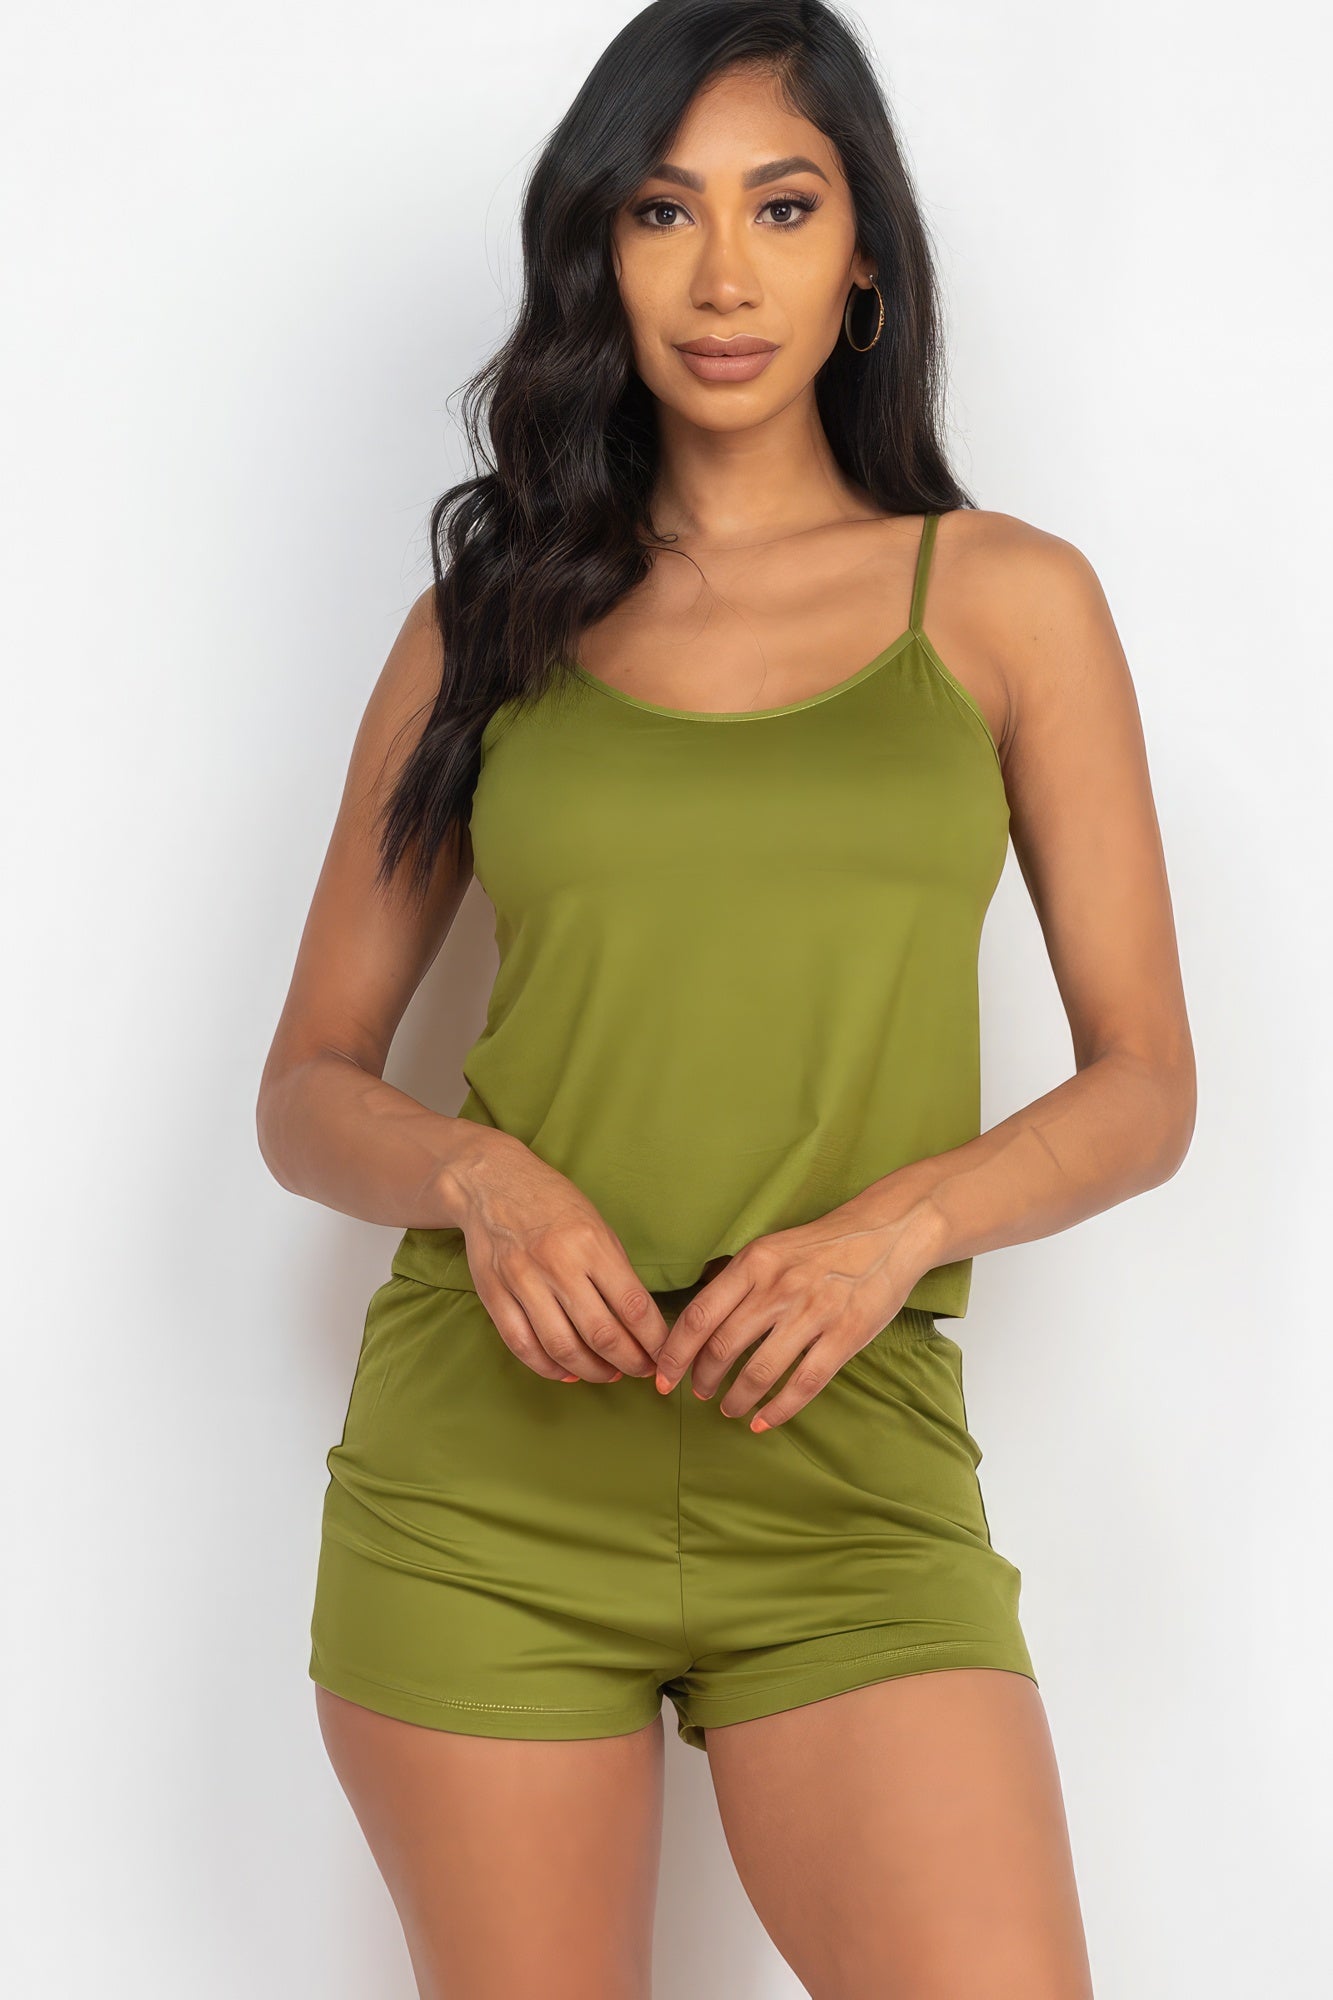 Olive Branch Sleeveless Cami Top & Shorts Set for Women - High-Stretch Jersey Blend, Sizes S, M, L